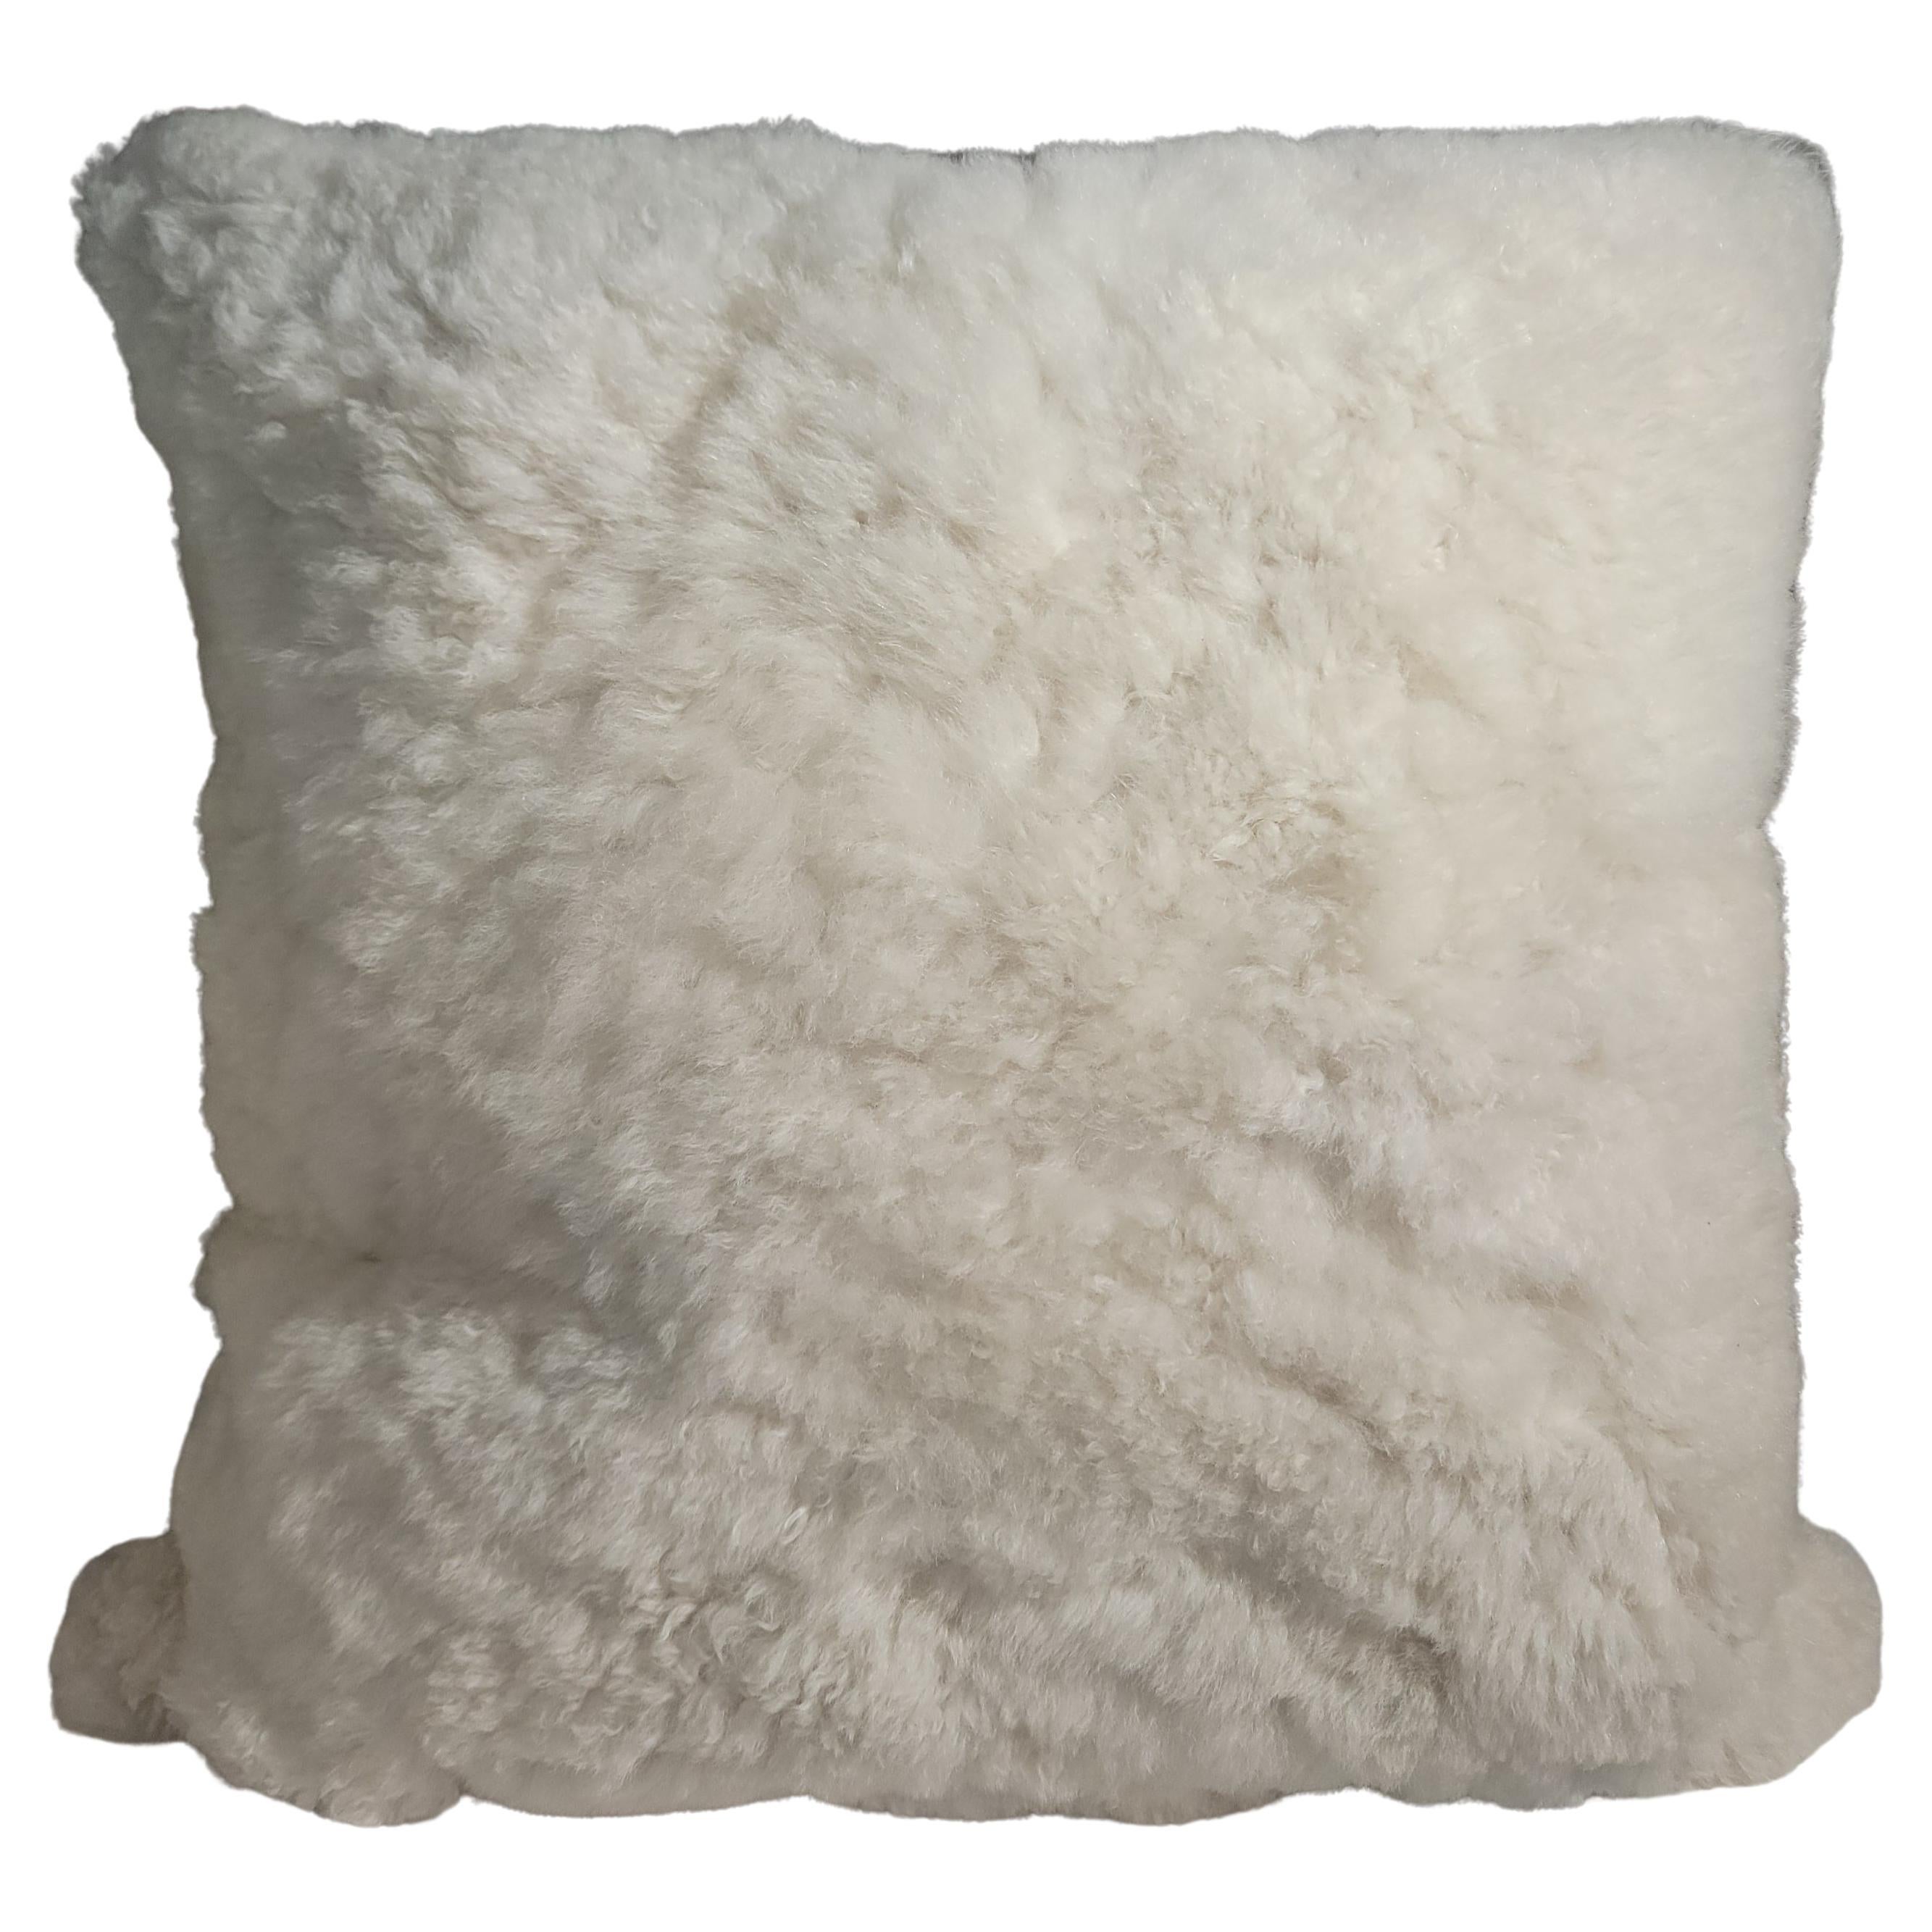 Shearing Pillow From Sheep Skin For Sale